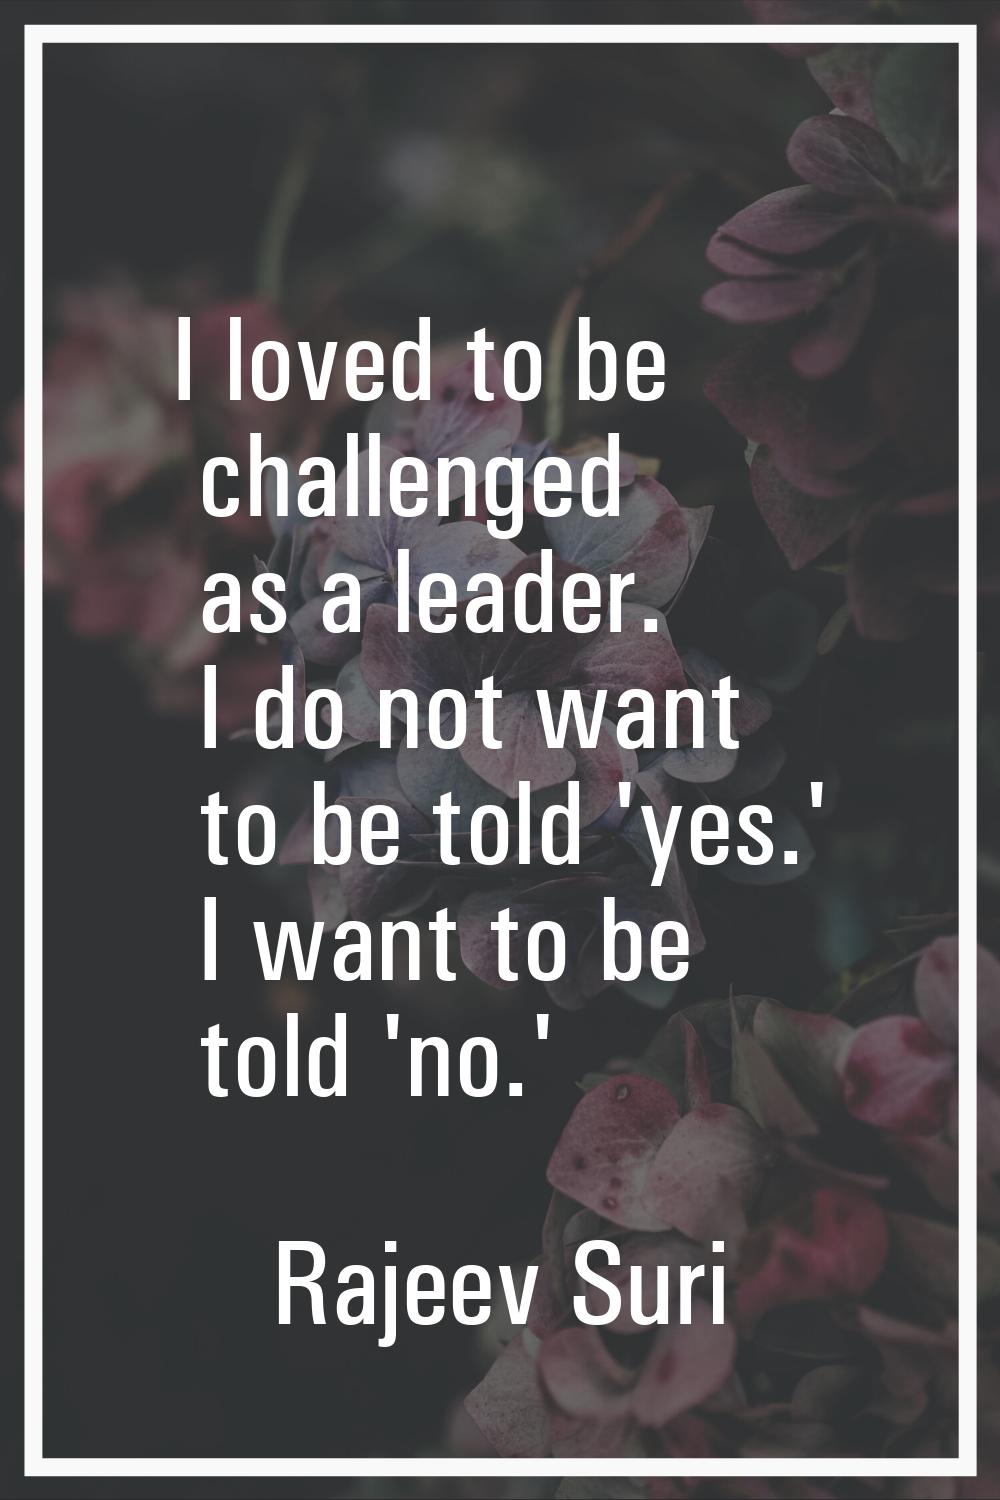 I loved to be challenged as a leader. I do not want to be told 'yes.' I want to be told 'no.'